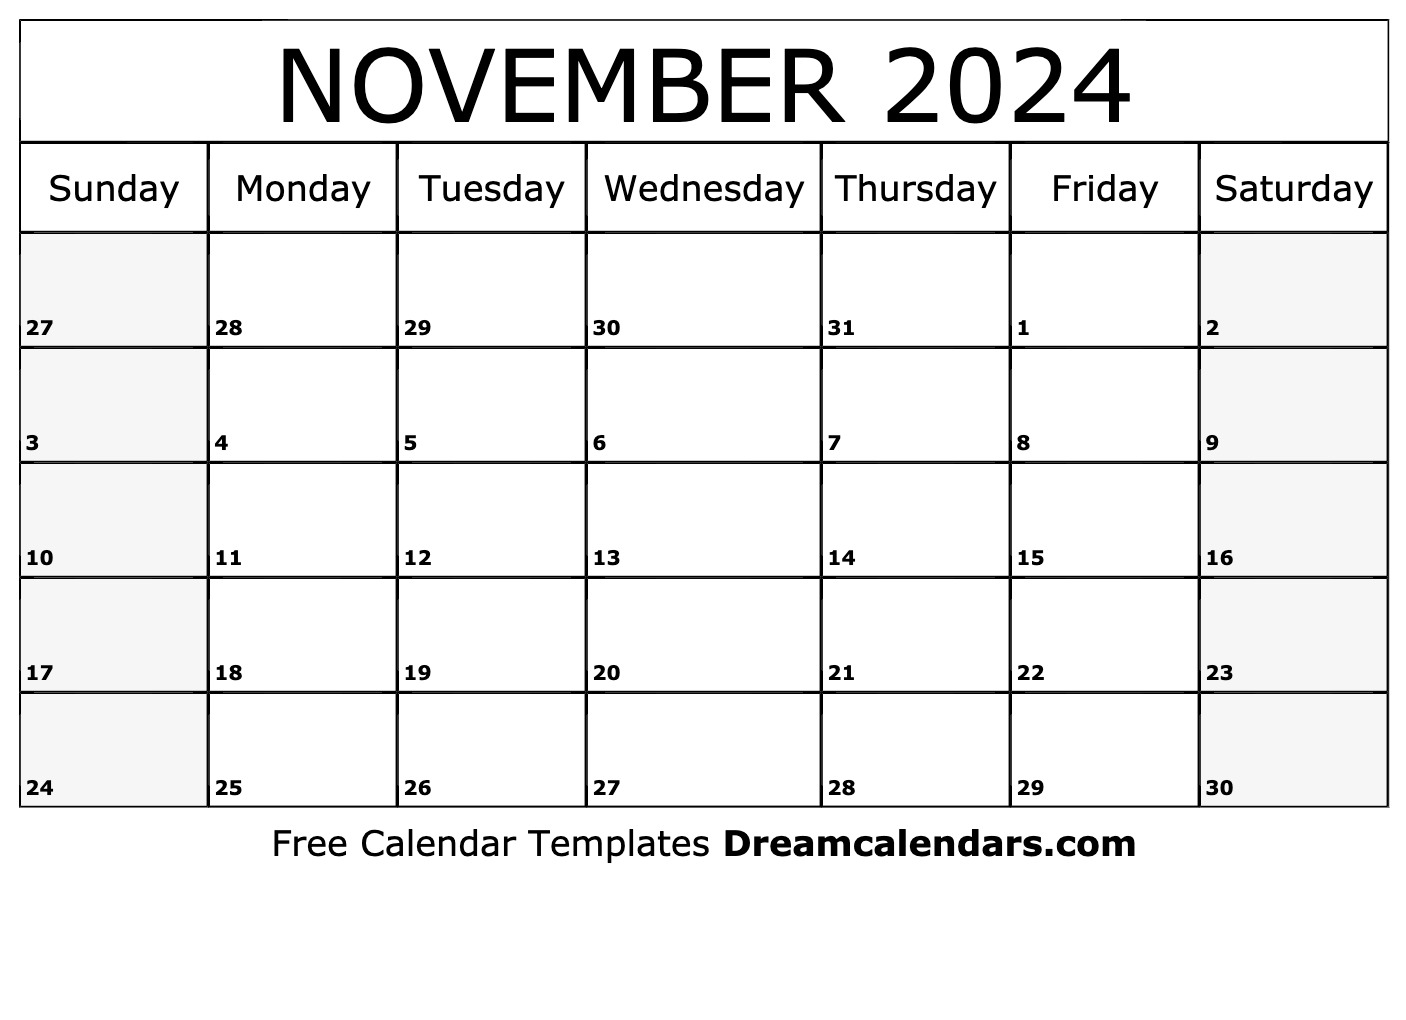 November Calendar In 2024 Latest Perfect Popular Famous | Lunar Events